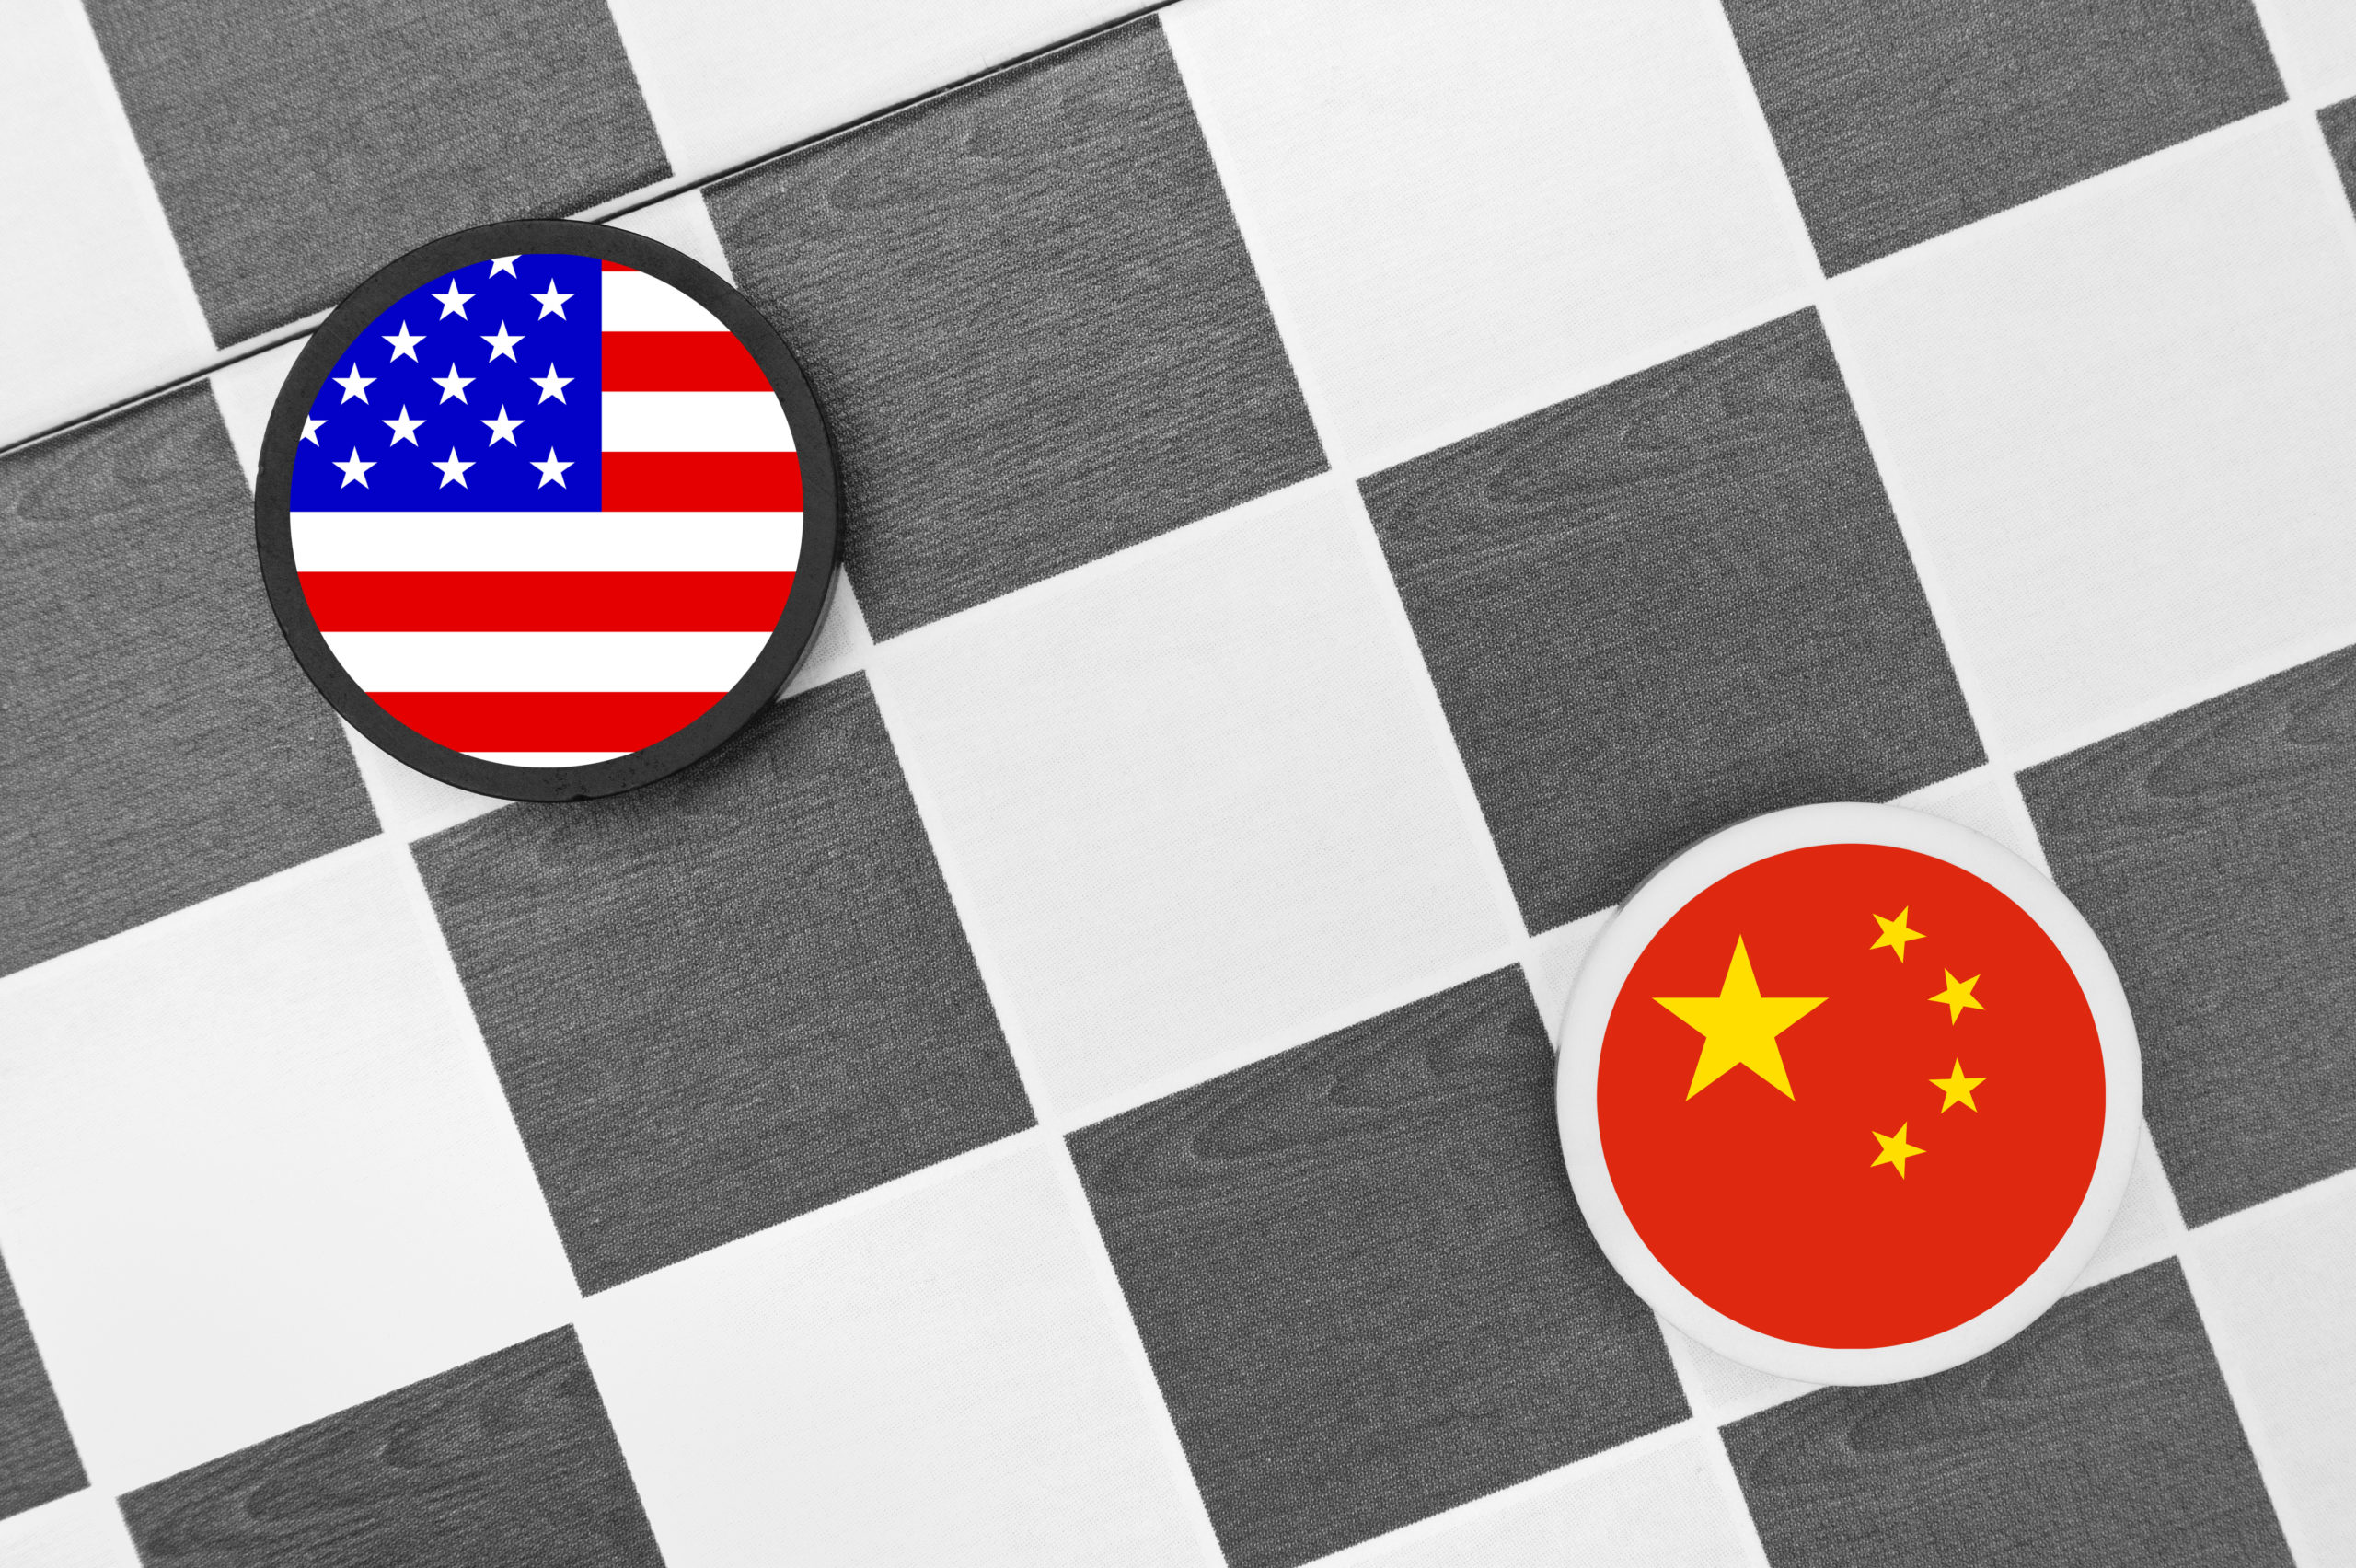 Will U.S.-China Competition Divide South Asia Along Great Power Fault Lines?